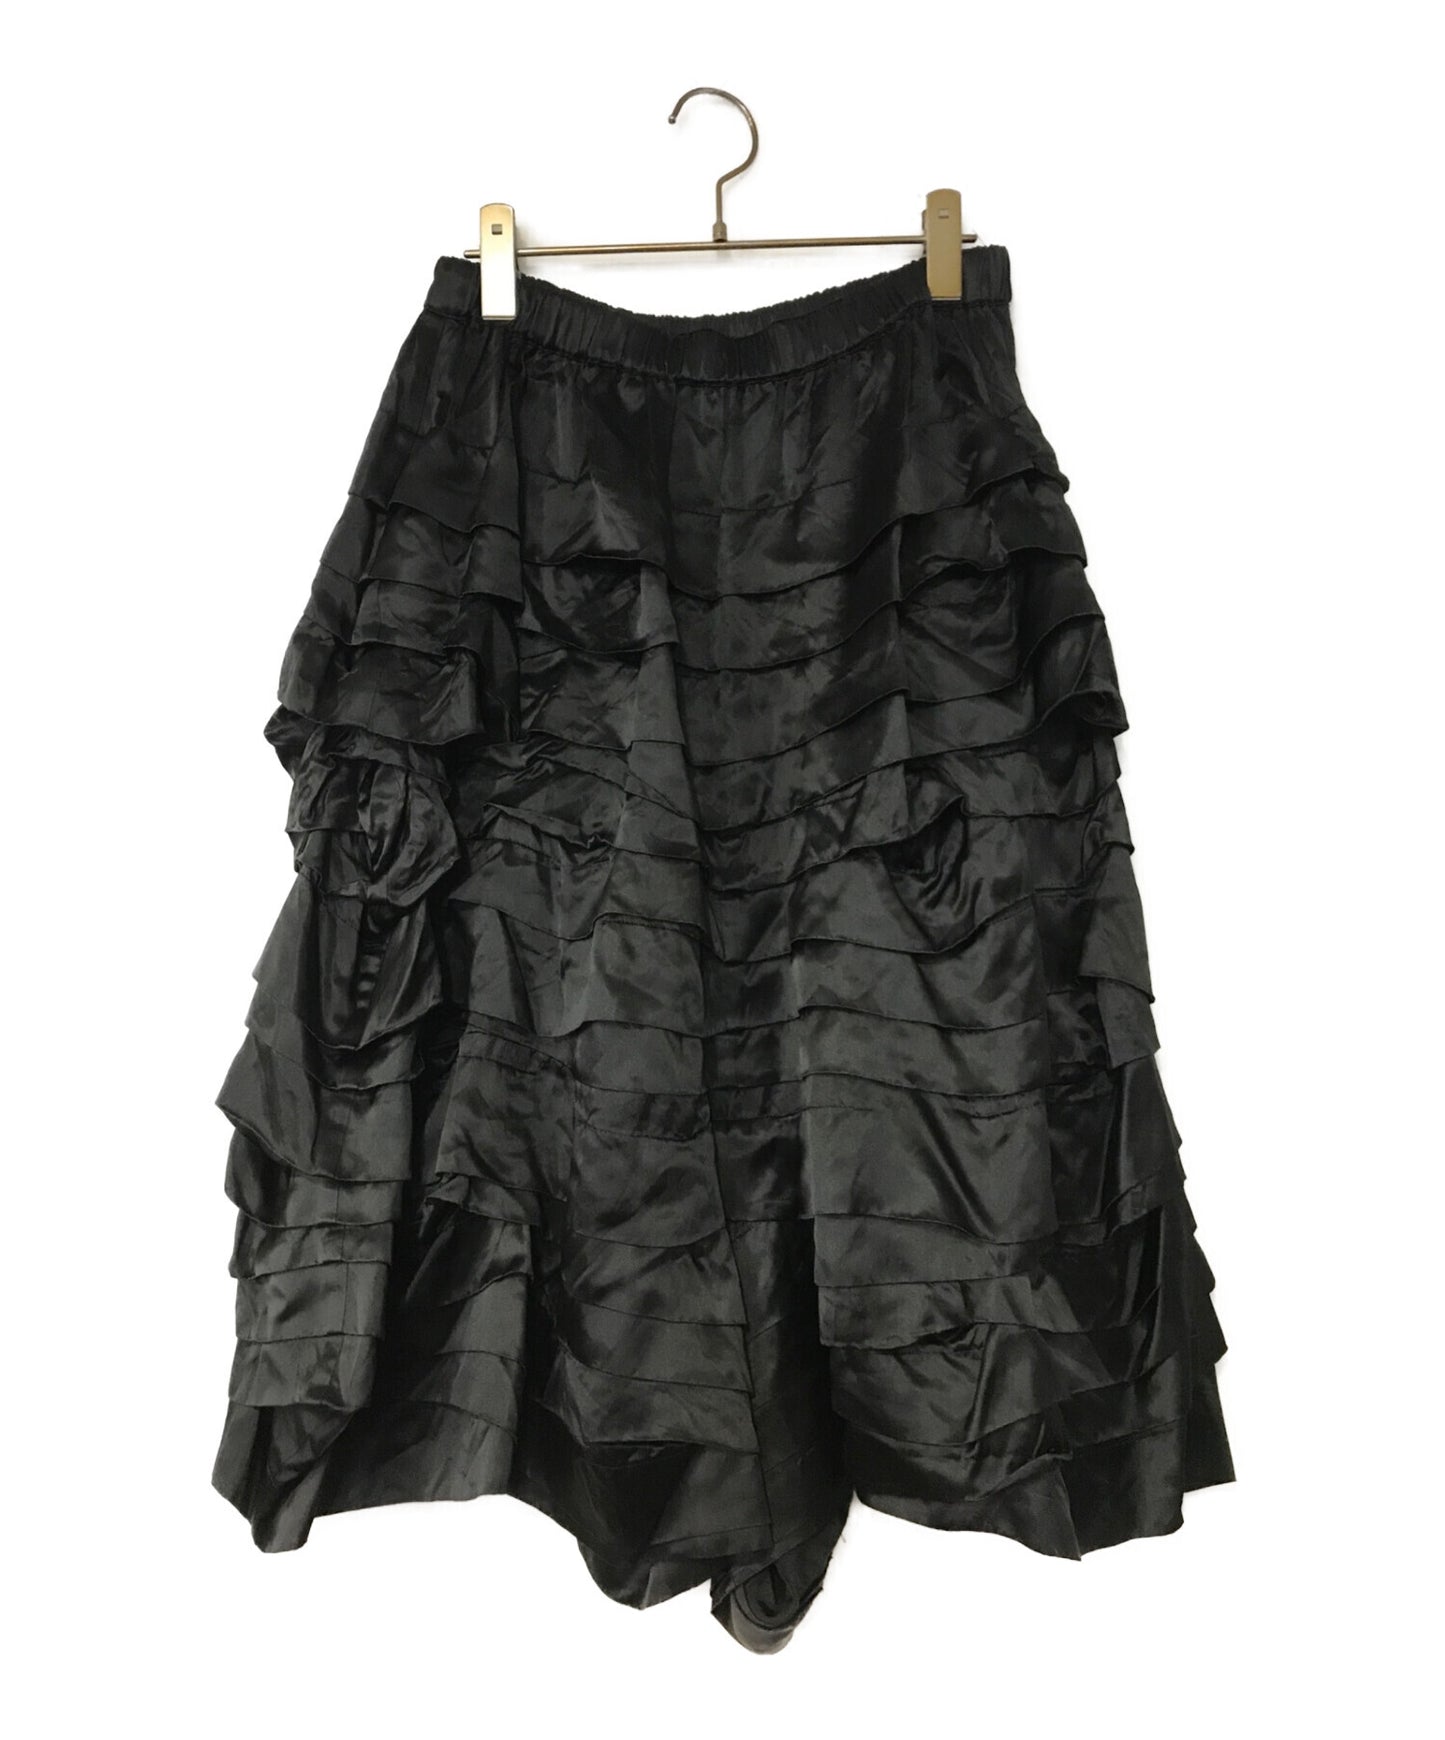 Comme des Garcons Comme des Garcons Satin Tiered Ruffle Sarouel 바지 RB-P003